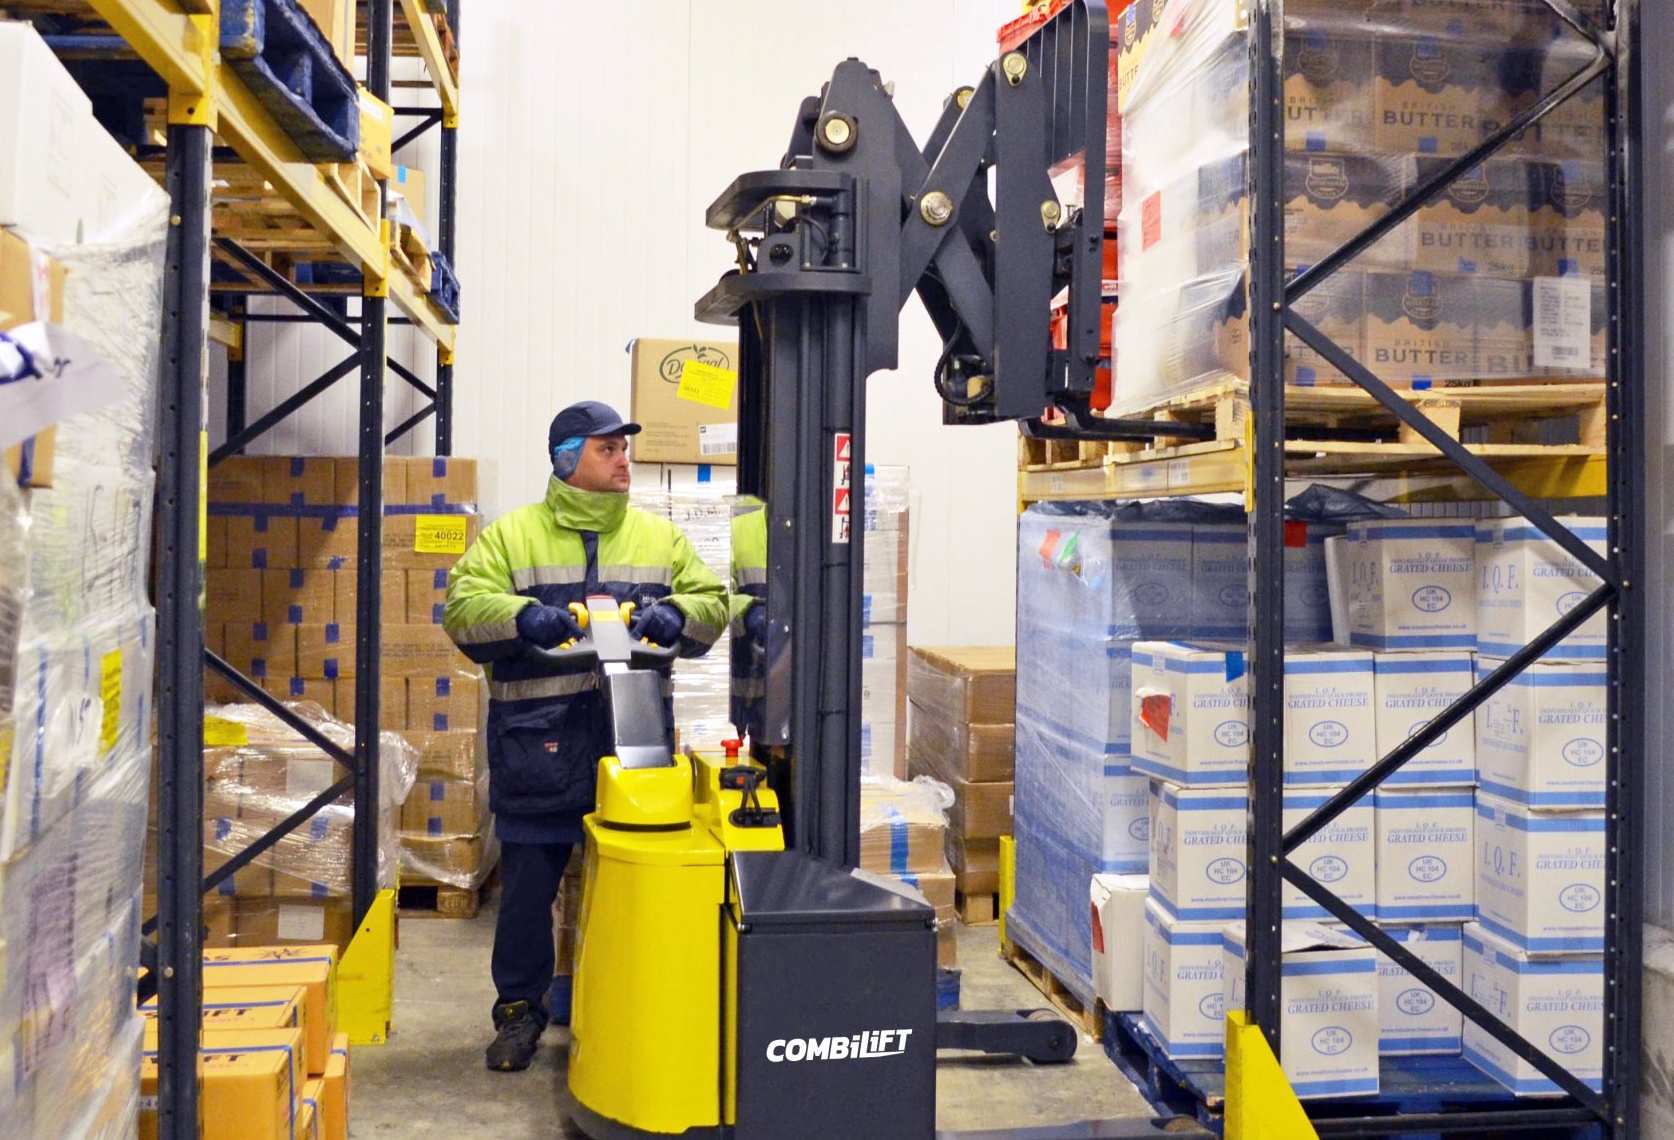 Combilift forklift being operated by man in high-vis coat